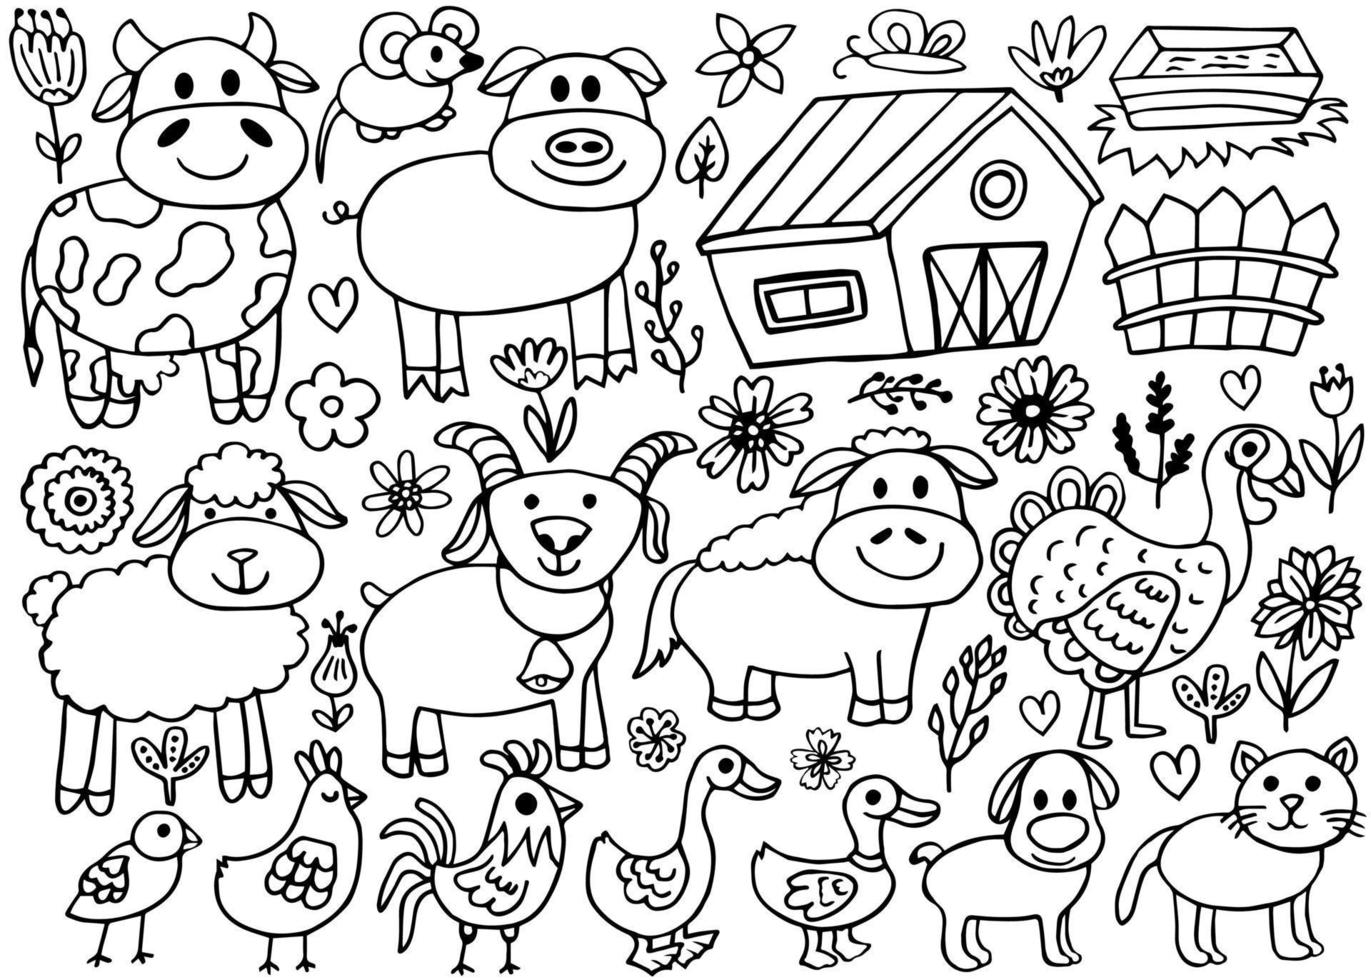 Hand drawn set farm animal, horse, cow, flowers. Doodle sketch style. Agriculture life background, icon. Isolated vector illustration.